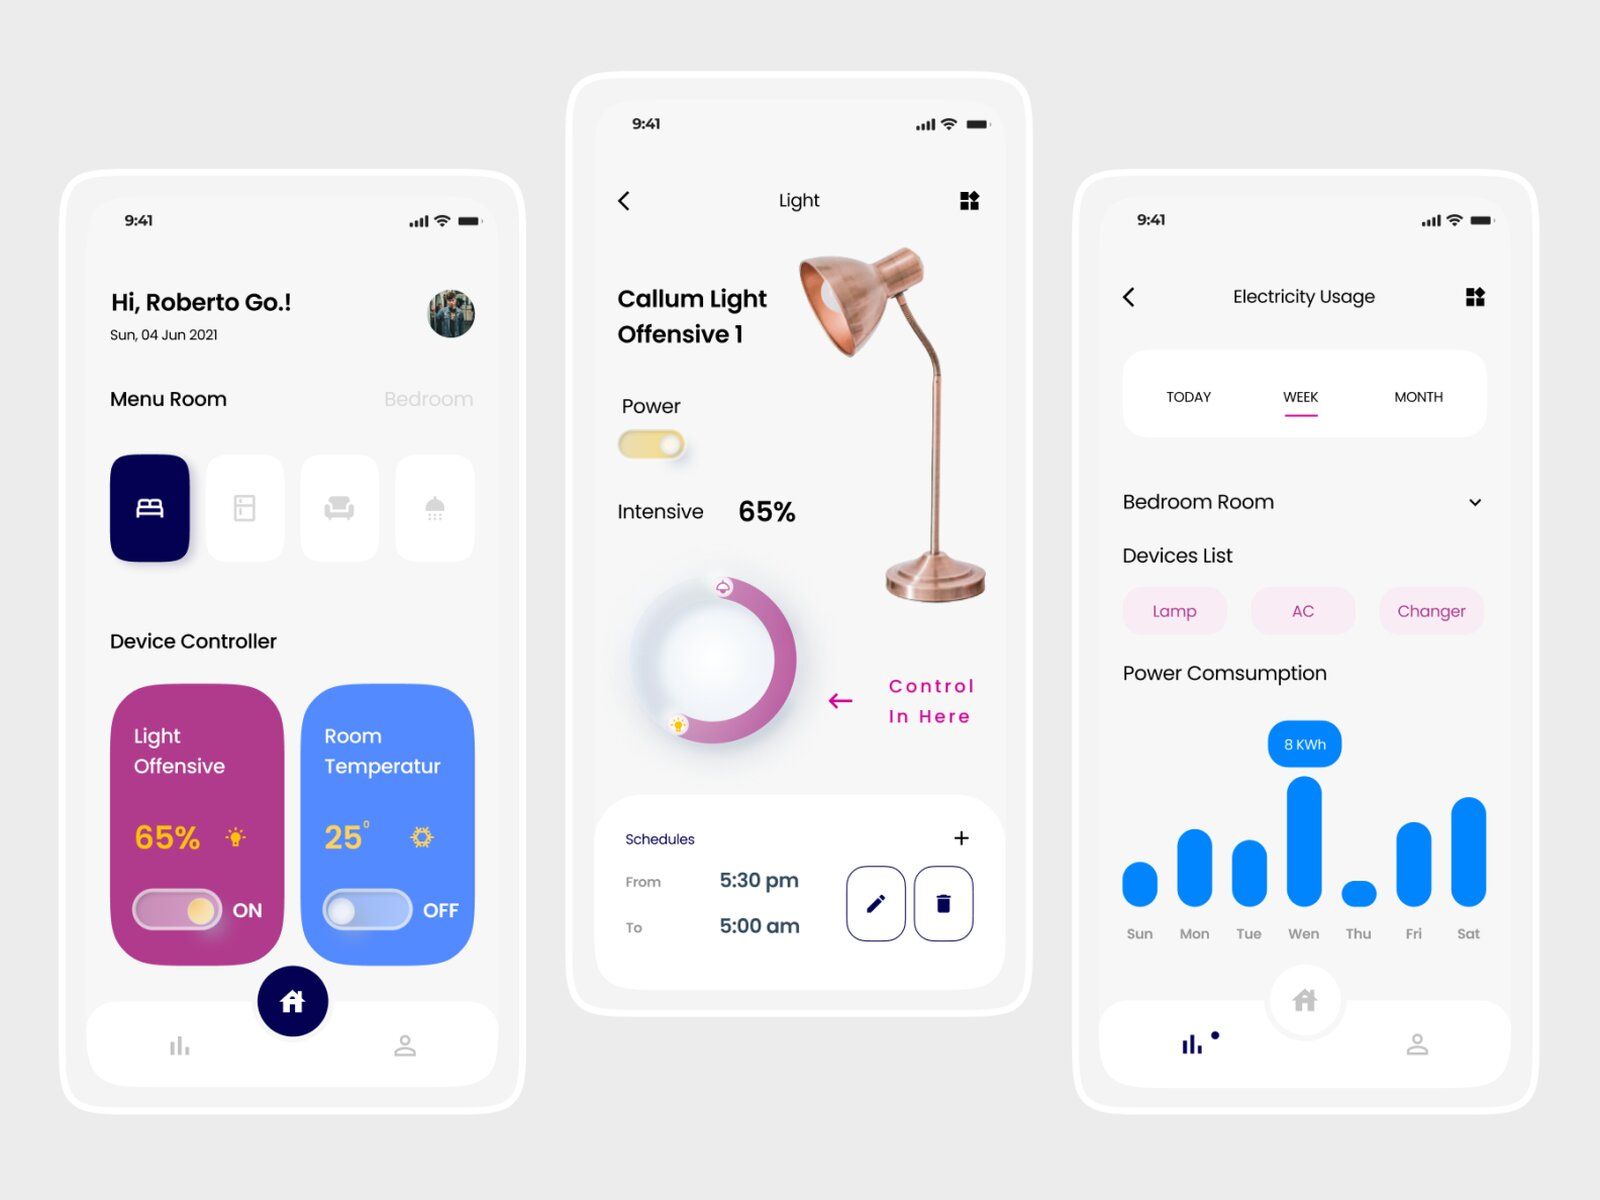 Smart home systems are a part of the IoT industry, which is why you sometimes can use tech stack for other IoT devices (*image by [Antareza Ghifary](https://dribbble.com/randomplayer){ rel="nofollow" target="_blank" .default-md}*)